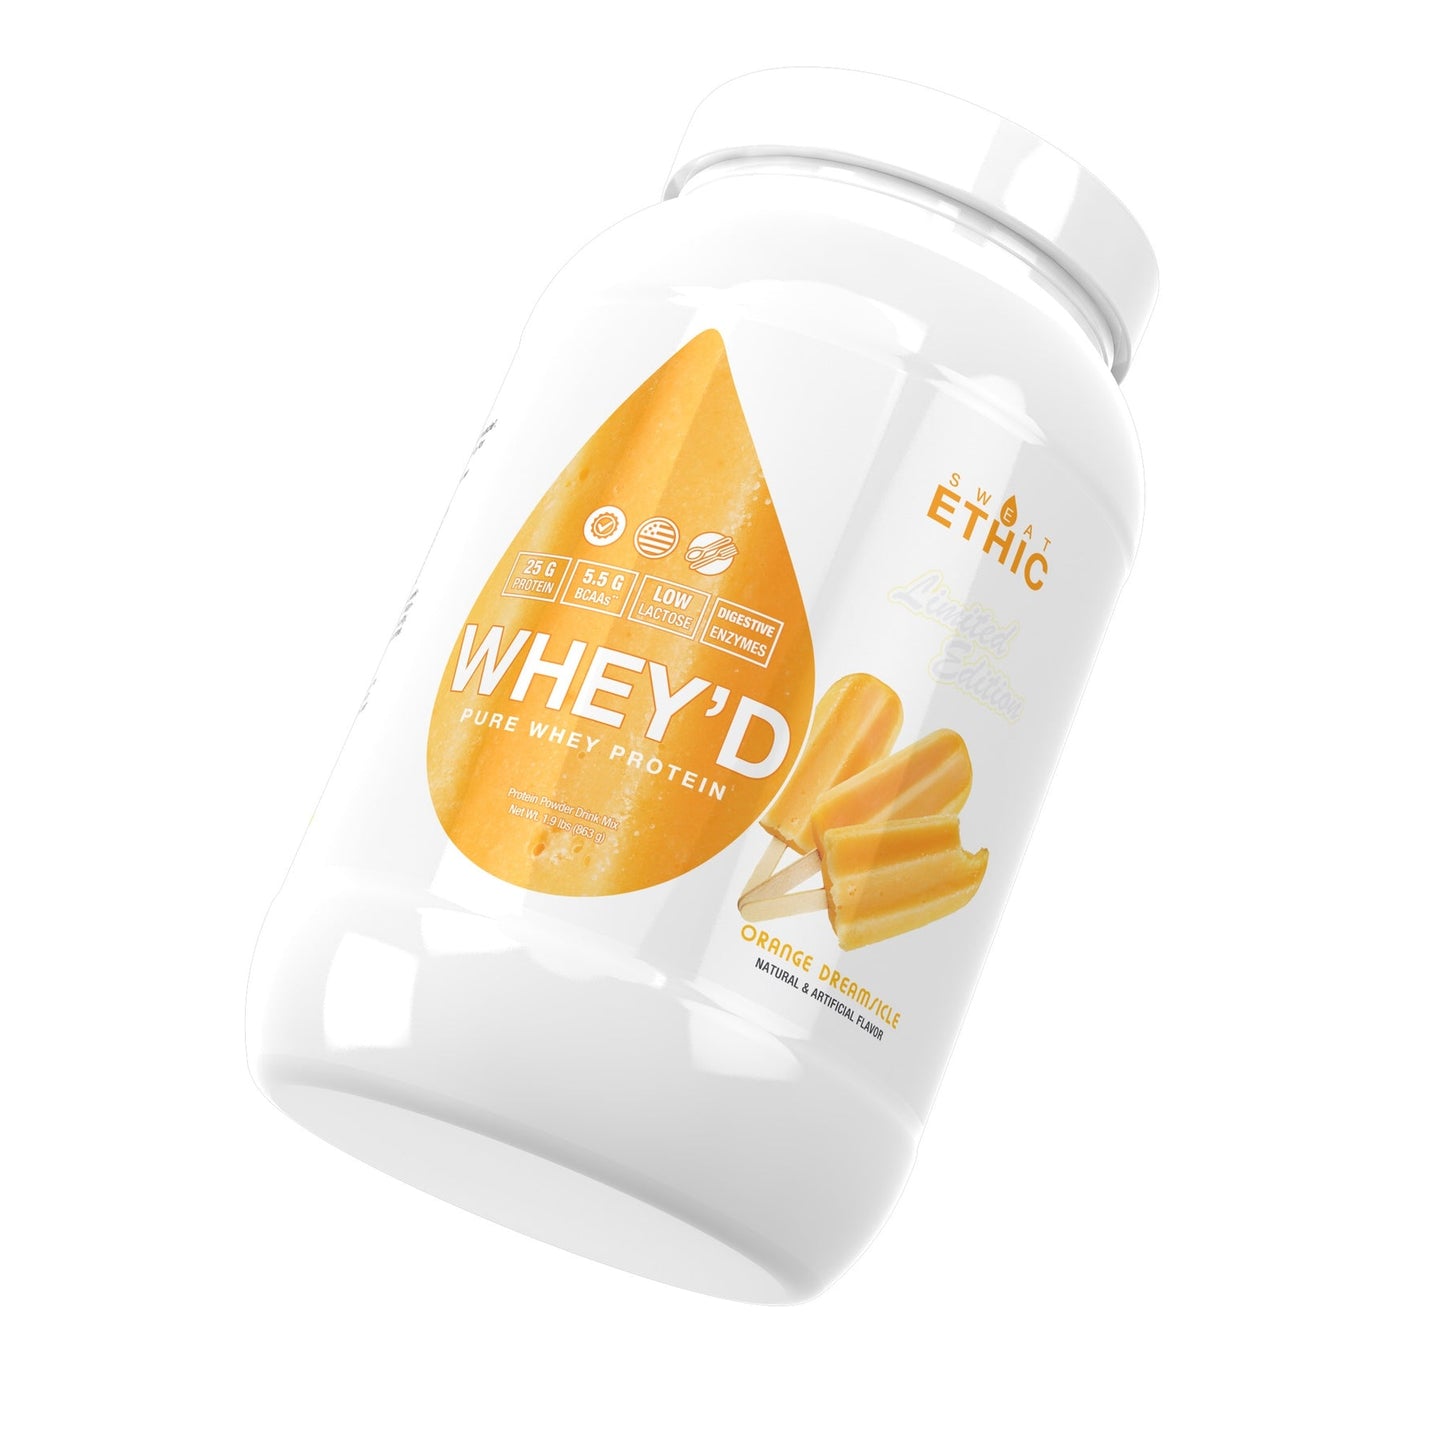 Sweat Ethic Whey'D Protein